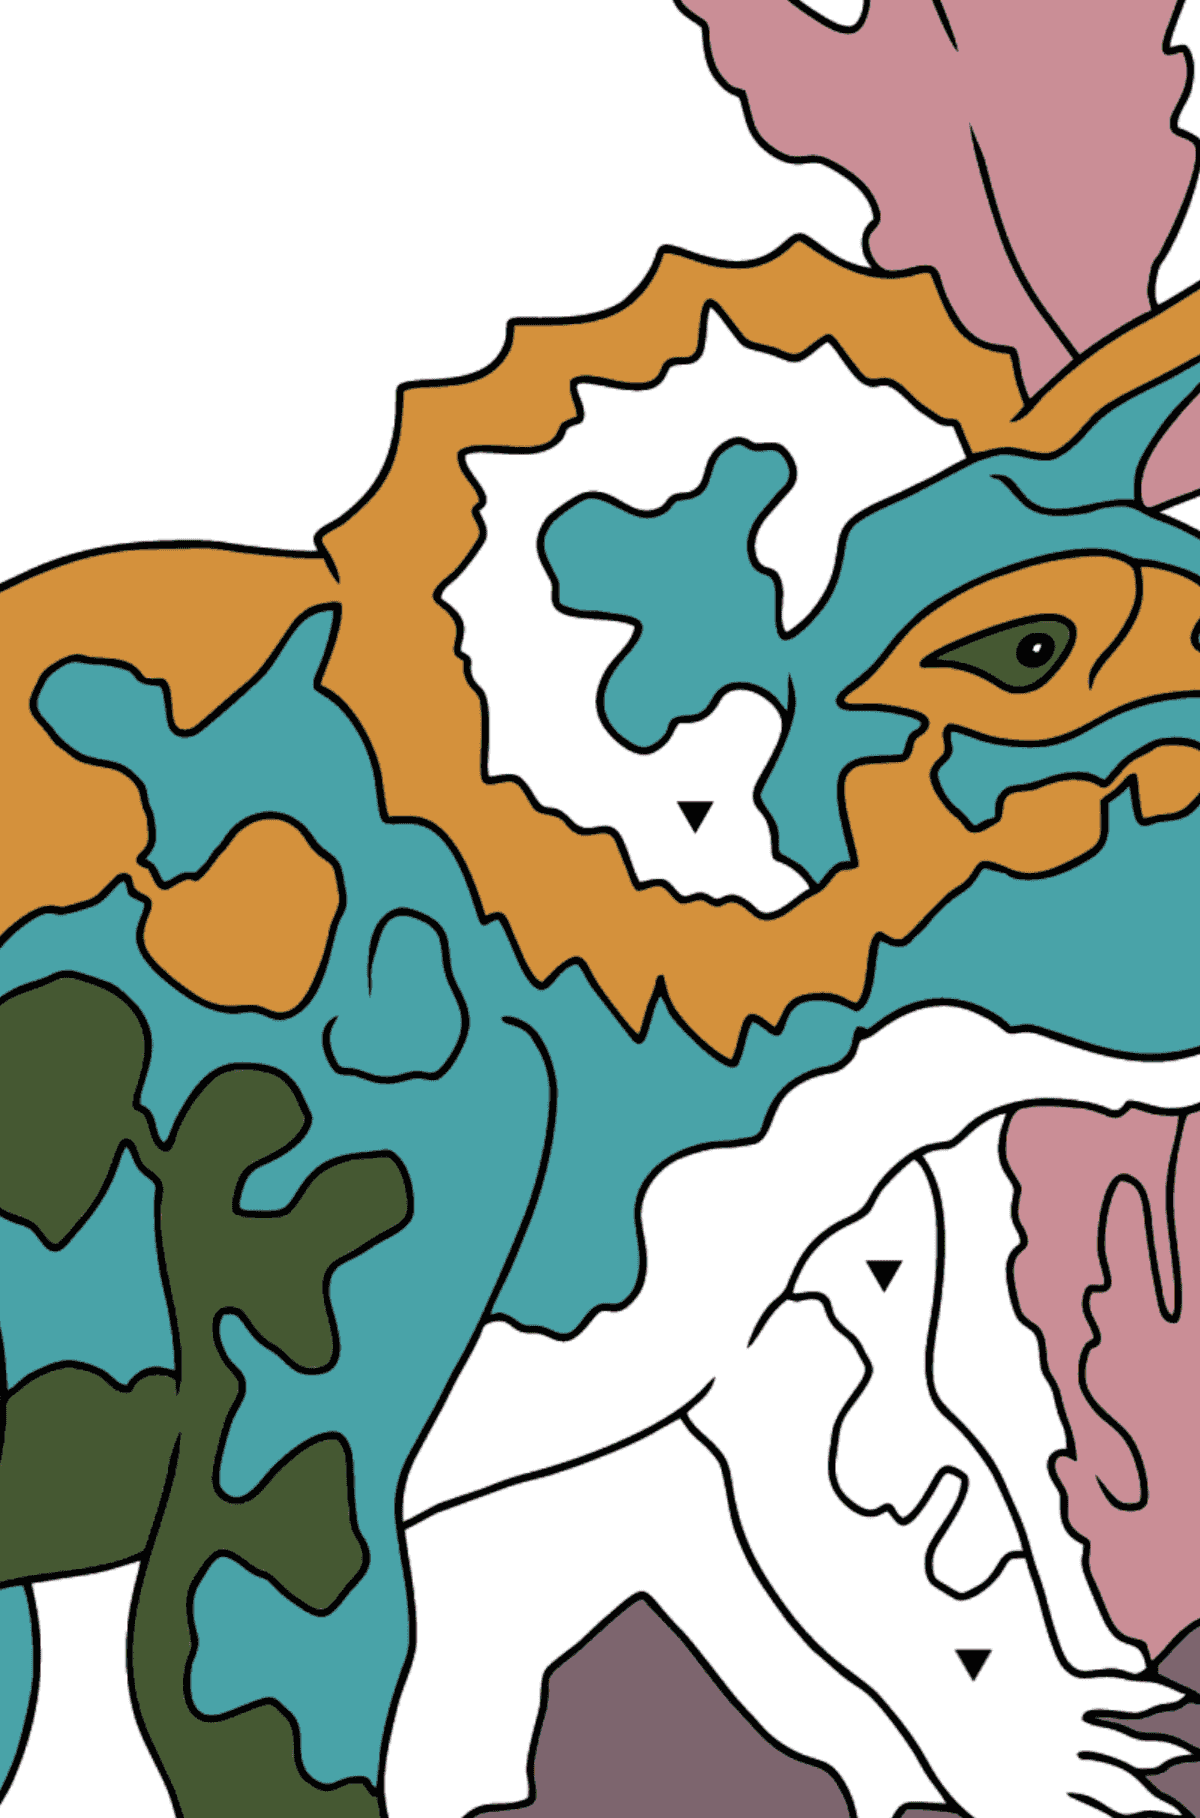 Triceratops Coloring Page (simple) - Coloring by Symbols for Kids